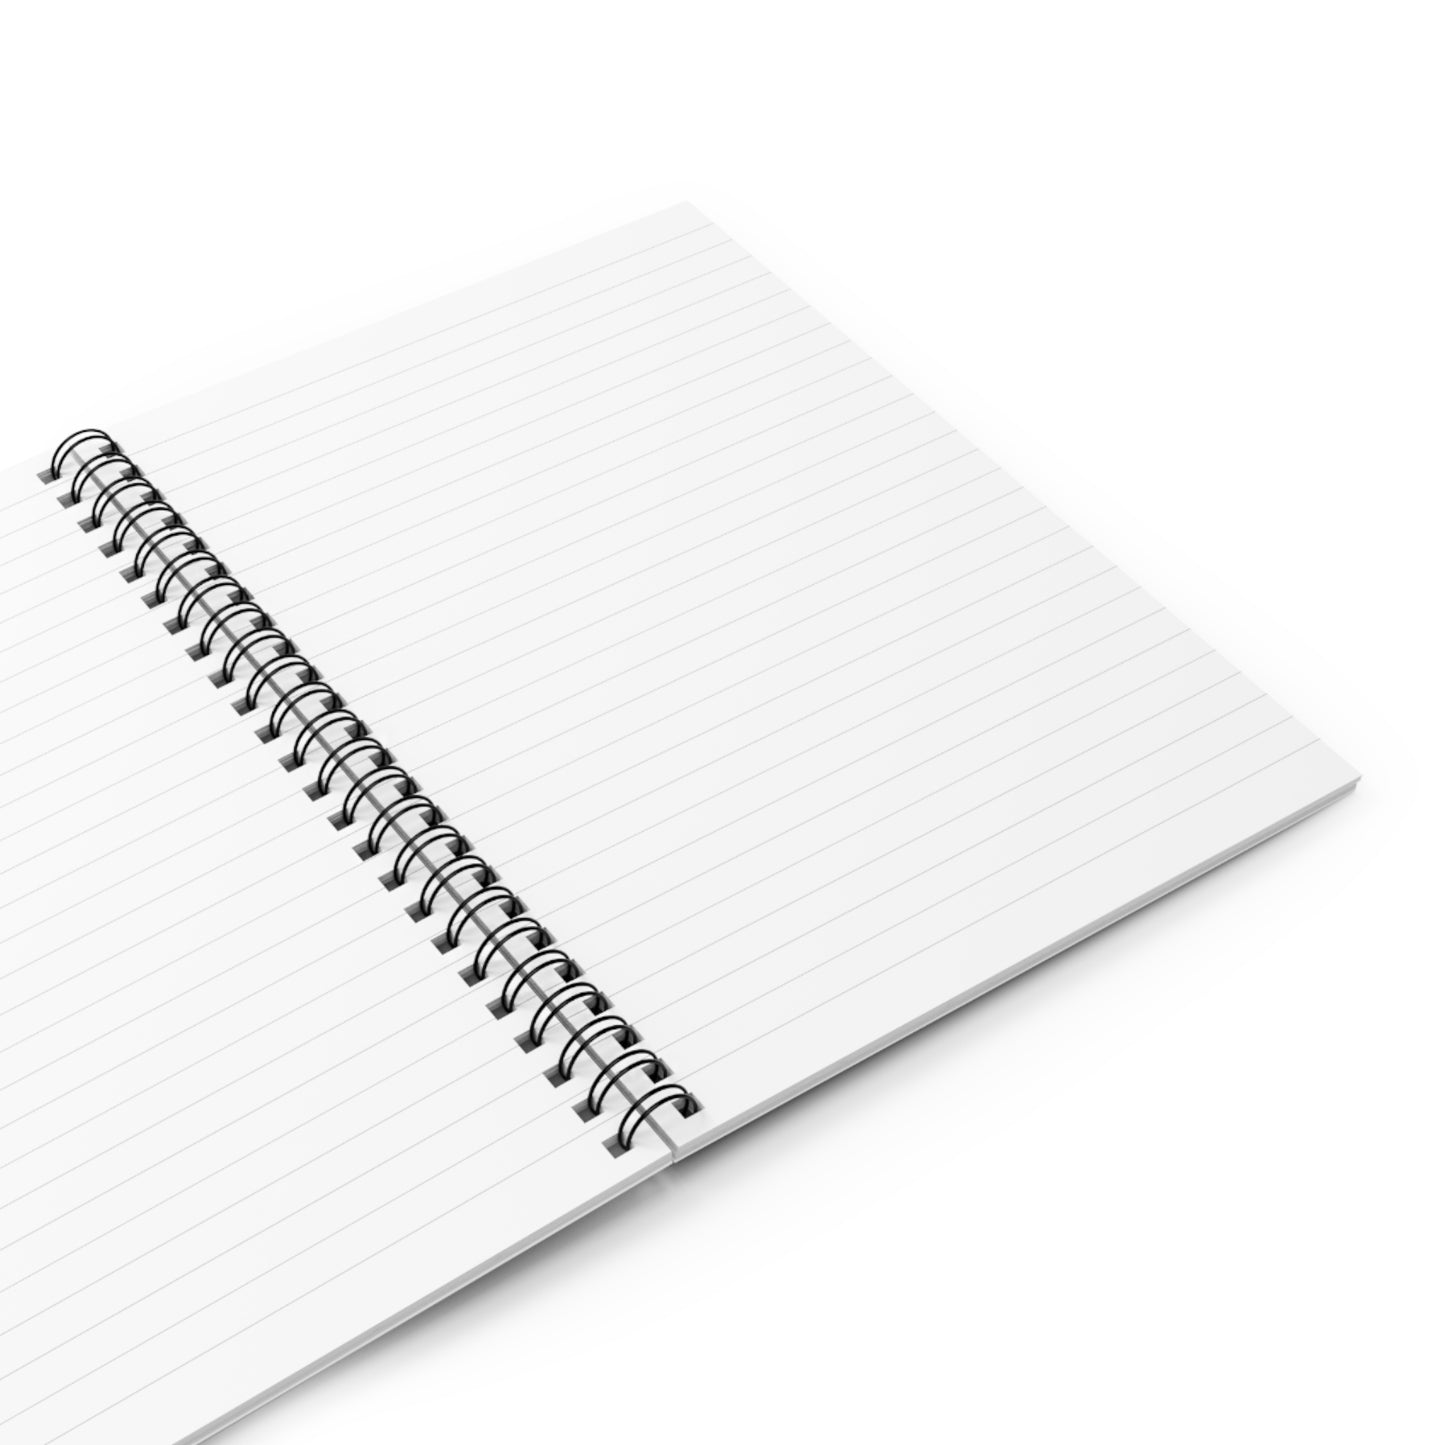 Motivational Spiral Notebook - Ruled Line for the Daily Brain Dumps Great for Use as a Journal